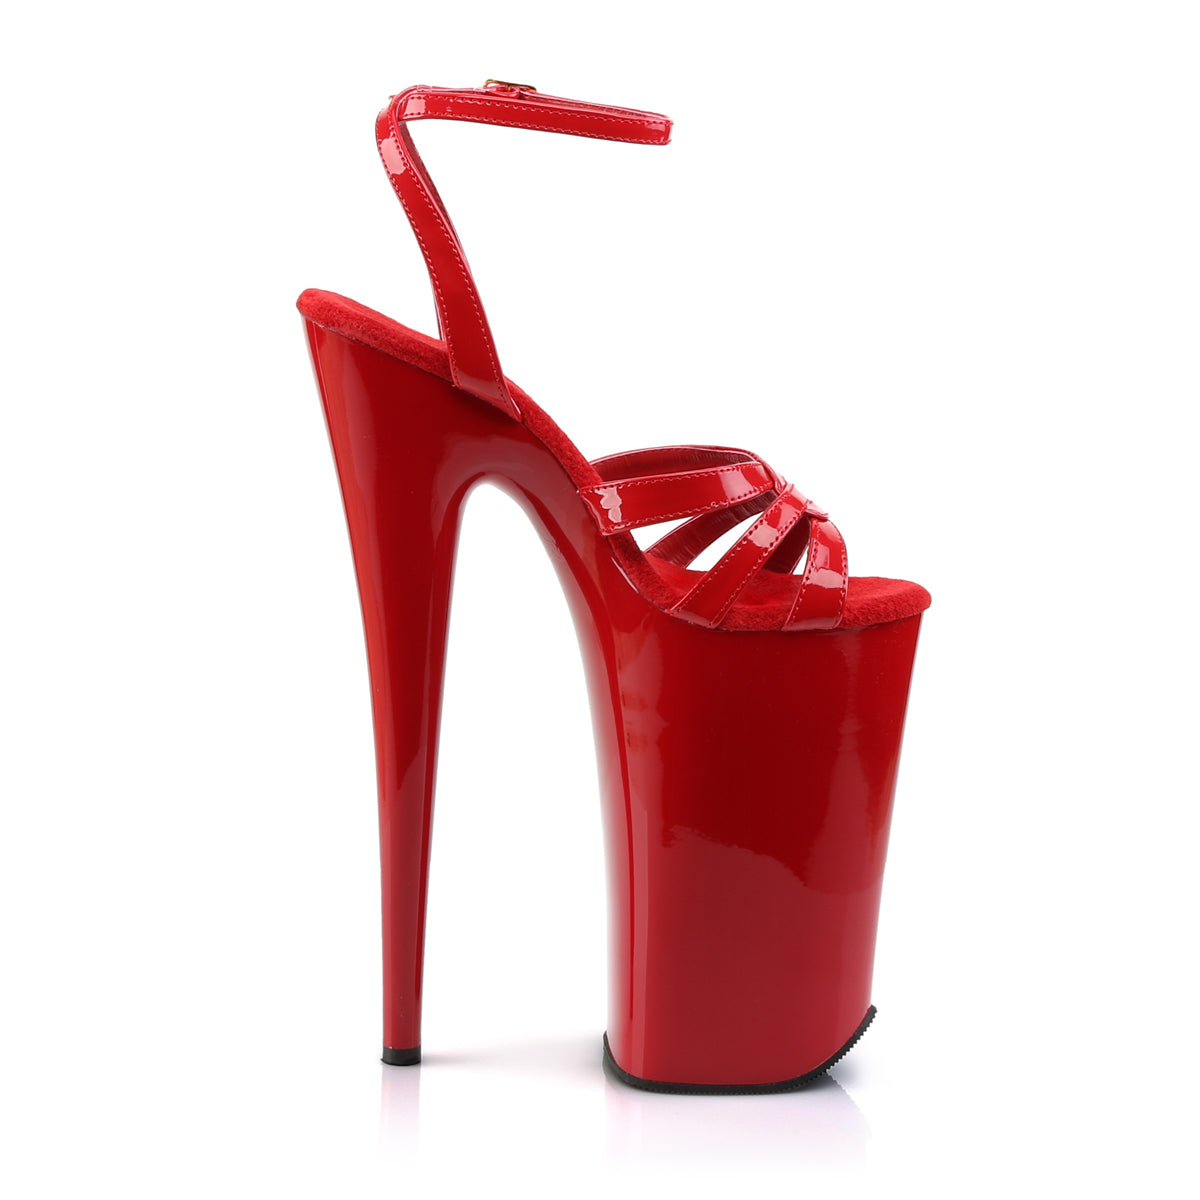 BEYOND-012 Pleasers Sexy 10" Heel Red Pole Dancing Platforms-Pleaser- Sexy Shoes Fetish Heels